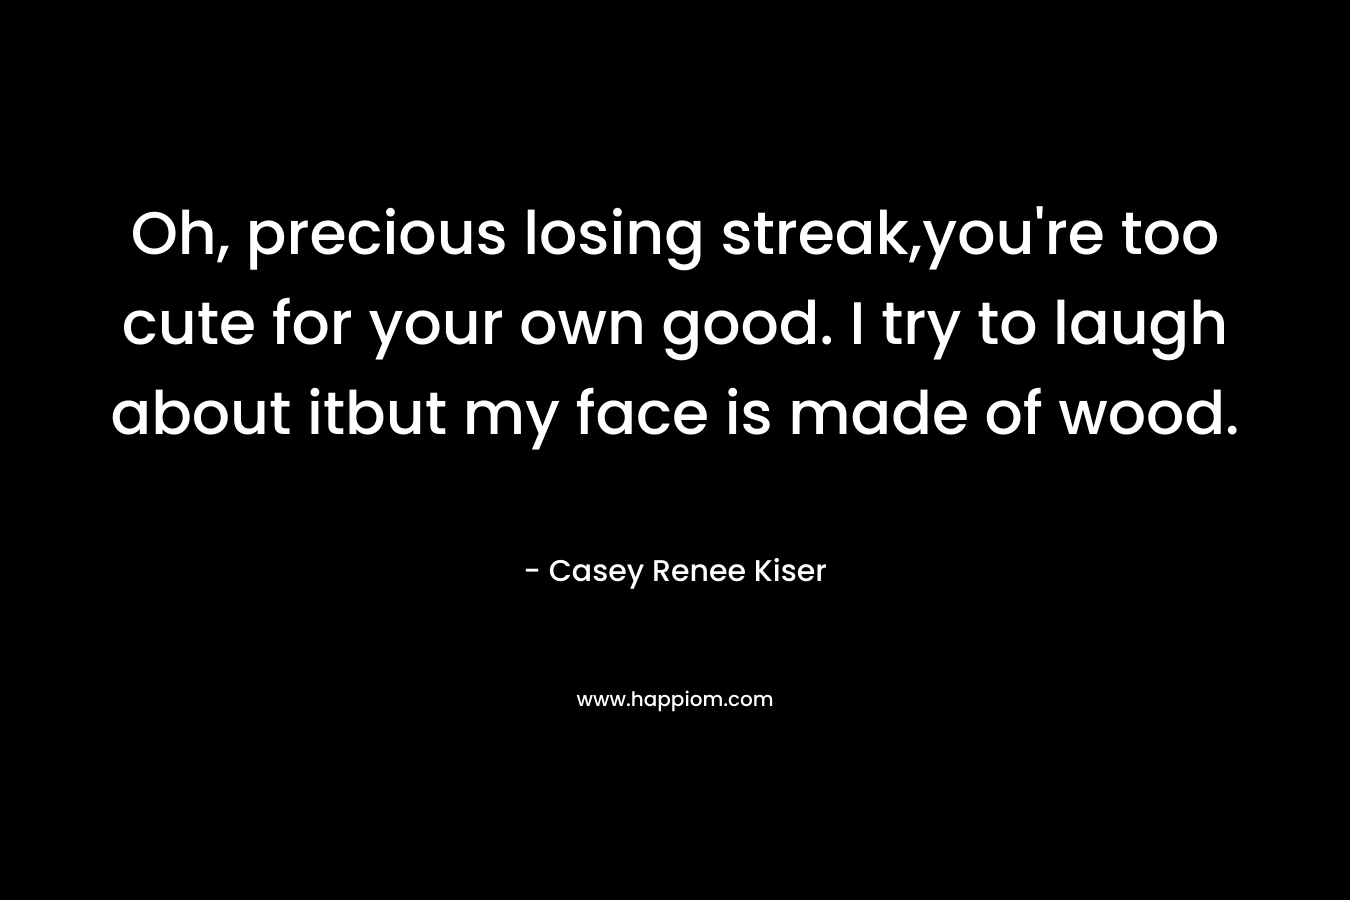 Oh, precious losing streak,you’re too cute for your own good. I try to laugh about itbut my face is made of wood. – Casey Renee Kiser